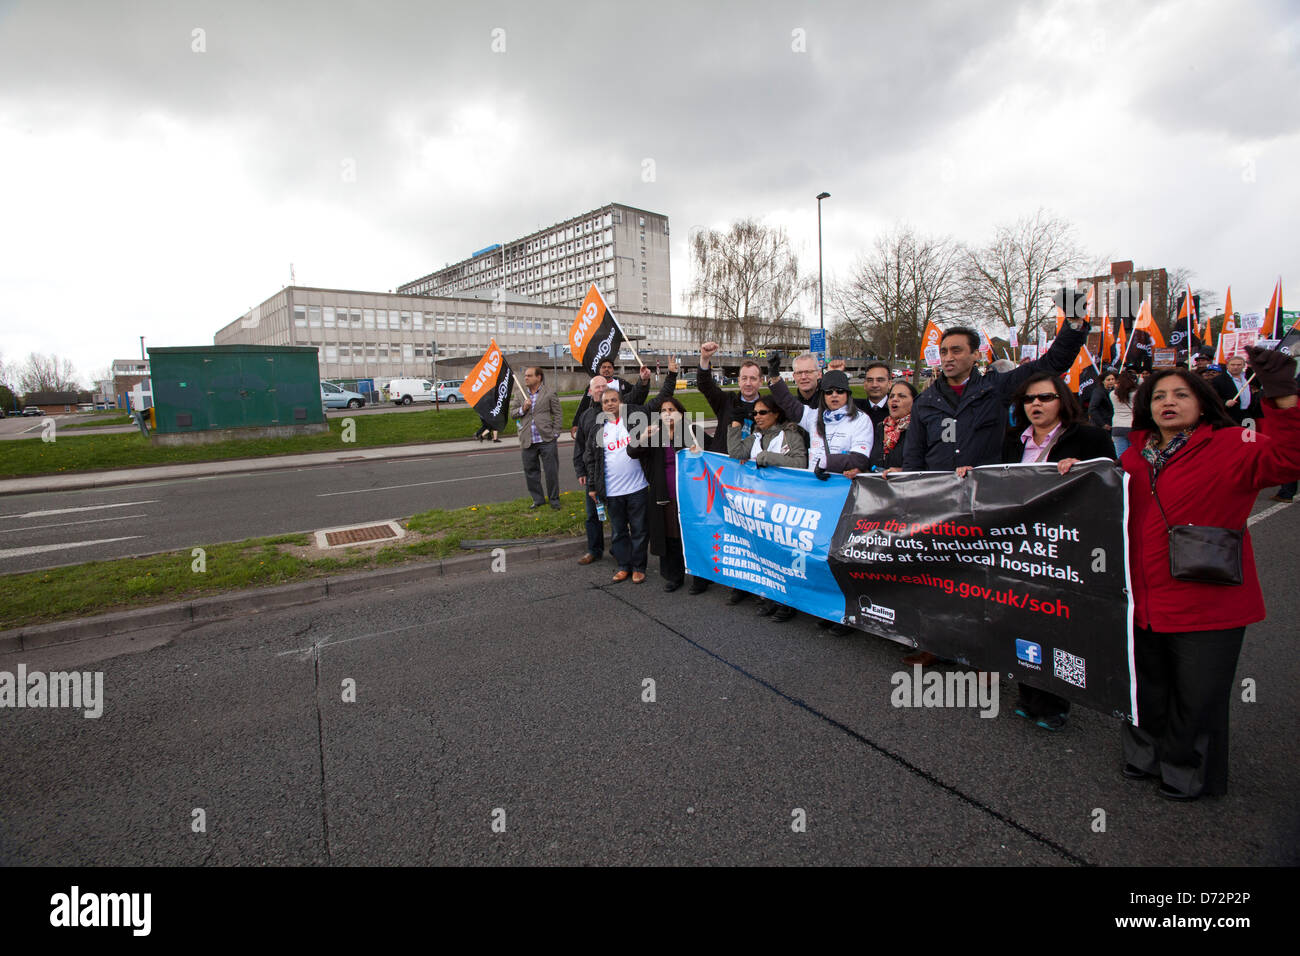 London, UK. 27th April 2013. Protesters walk past Ealing hospital, hundreds of people marched in West London in protest against the closing of A&E departments at Charing Cross, Hammersmith, Central Middlesex and Ealing Hospitals.Credit:Sebastian Remme/Alamy Live News Stock Photo